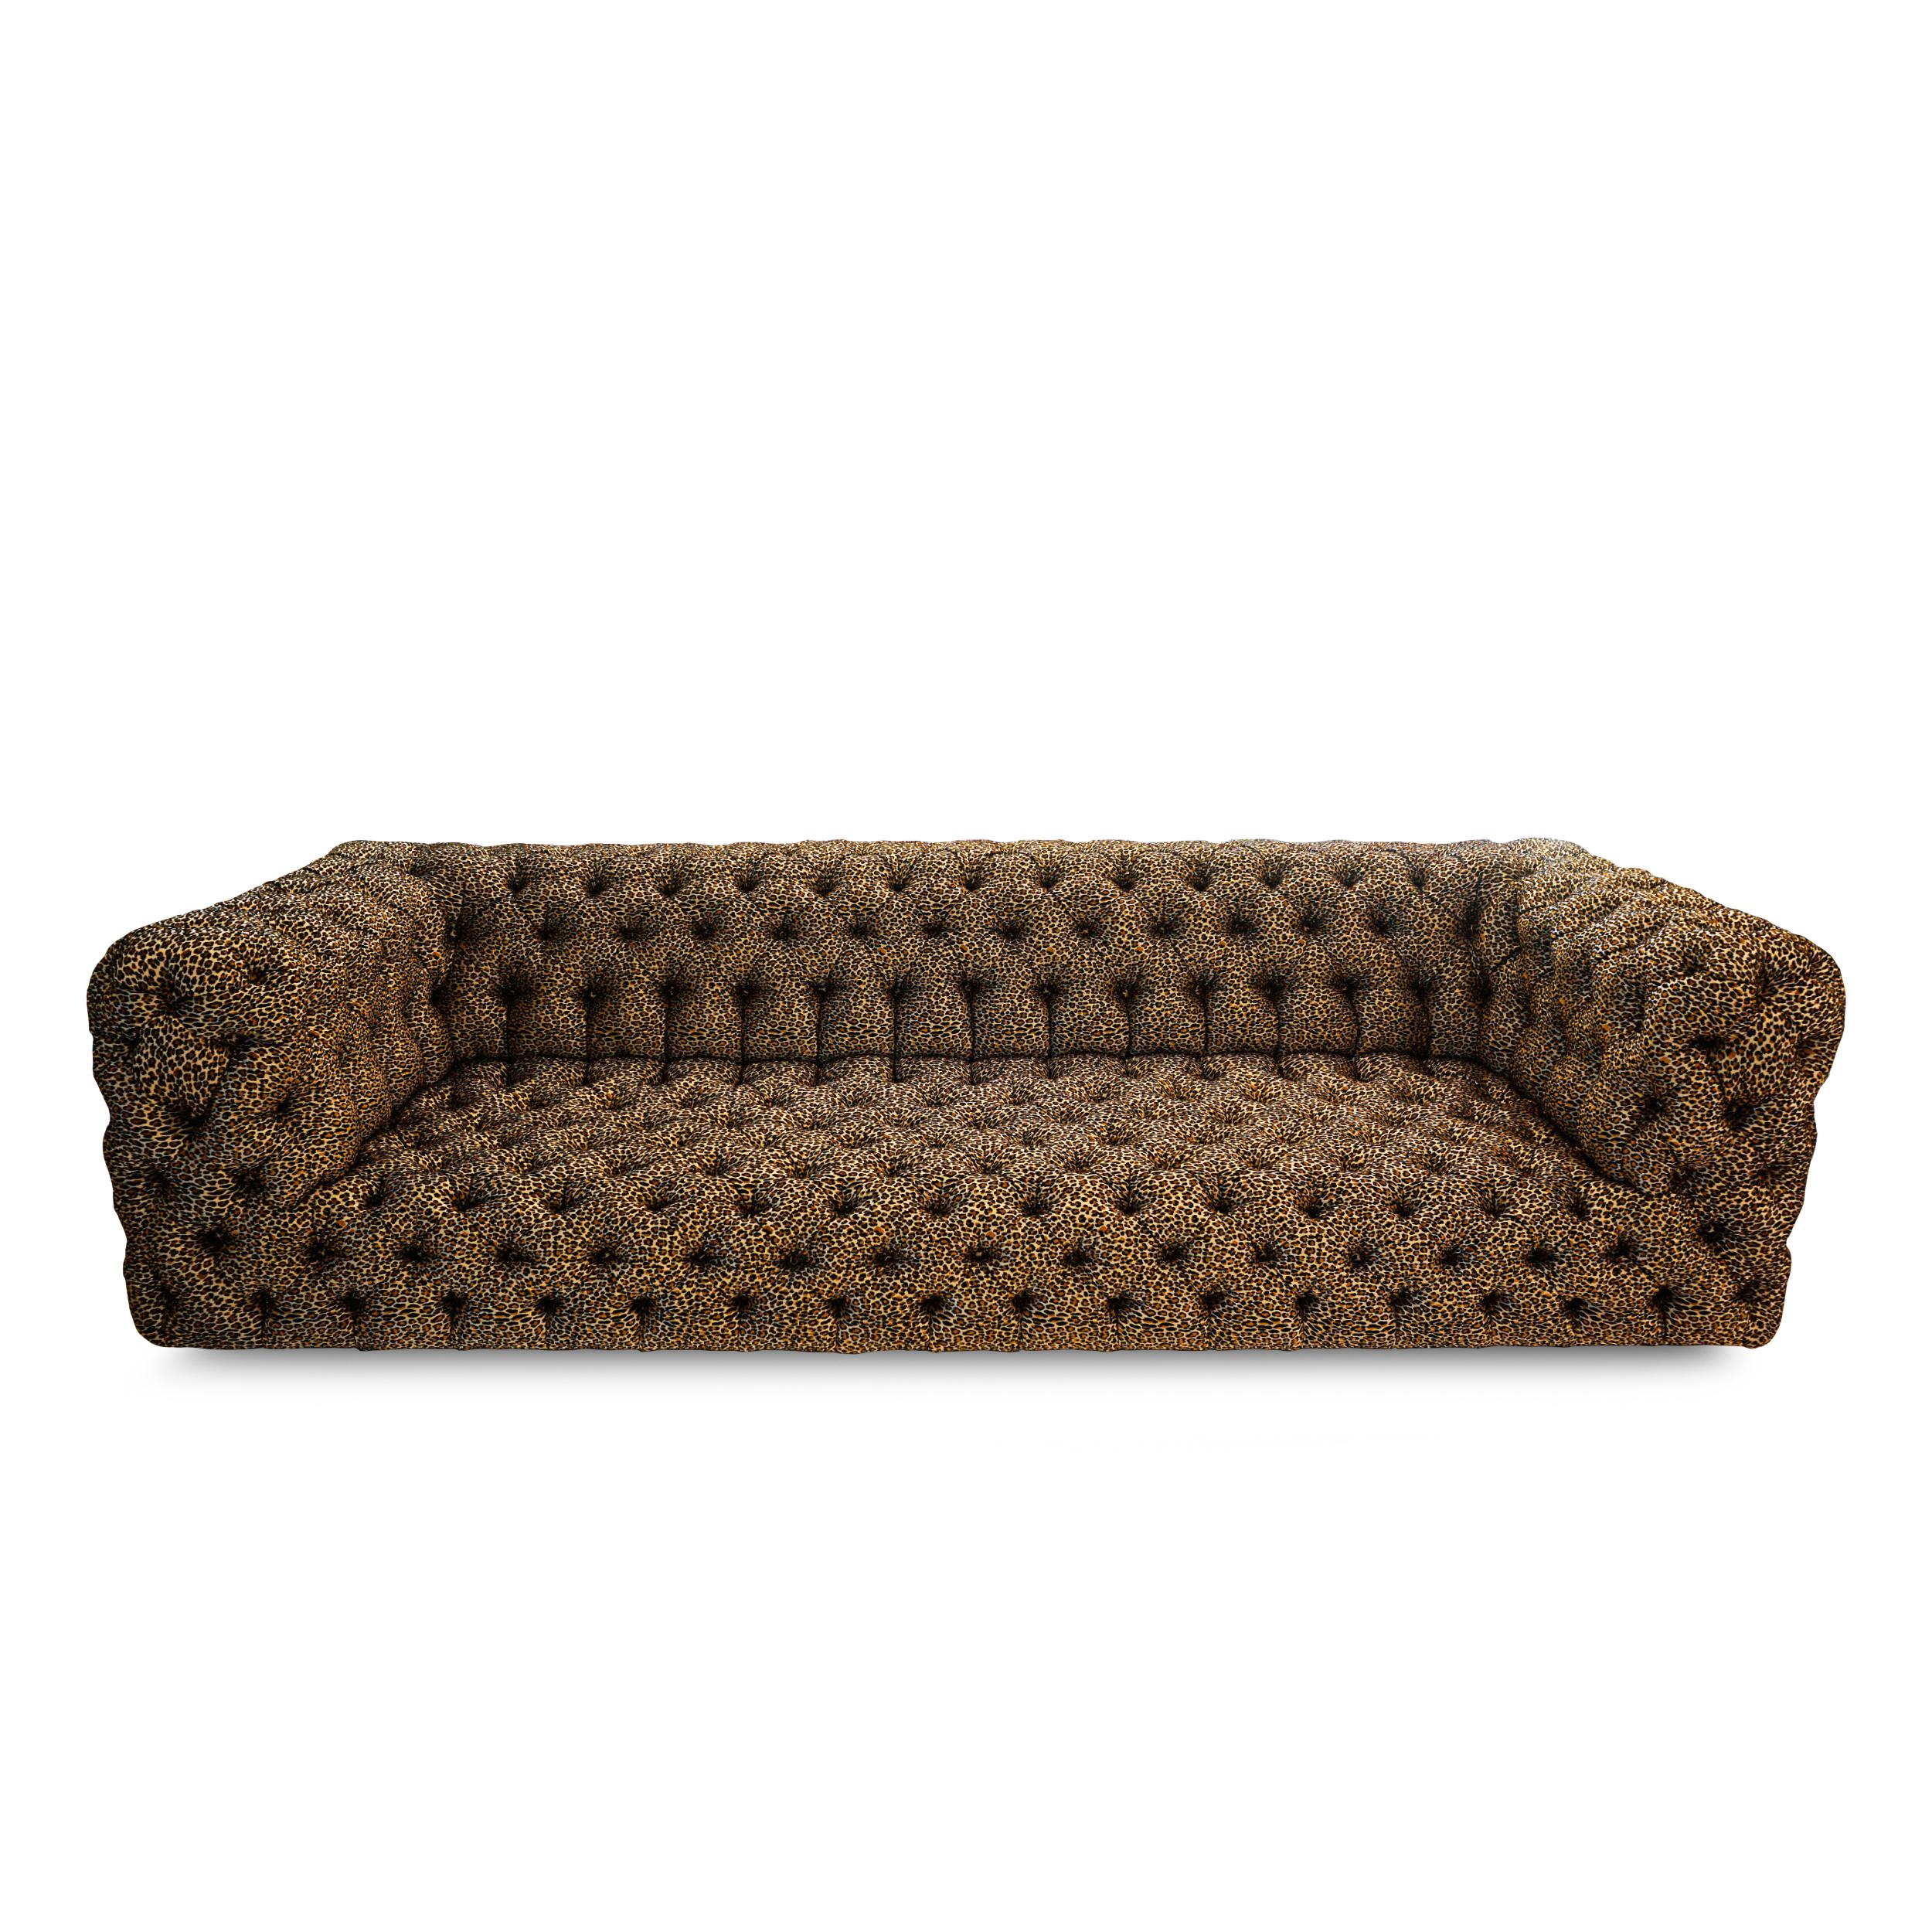 American Tufted Leopard Print Sofa For Sale